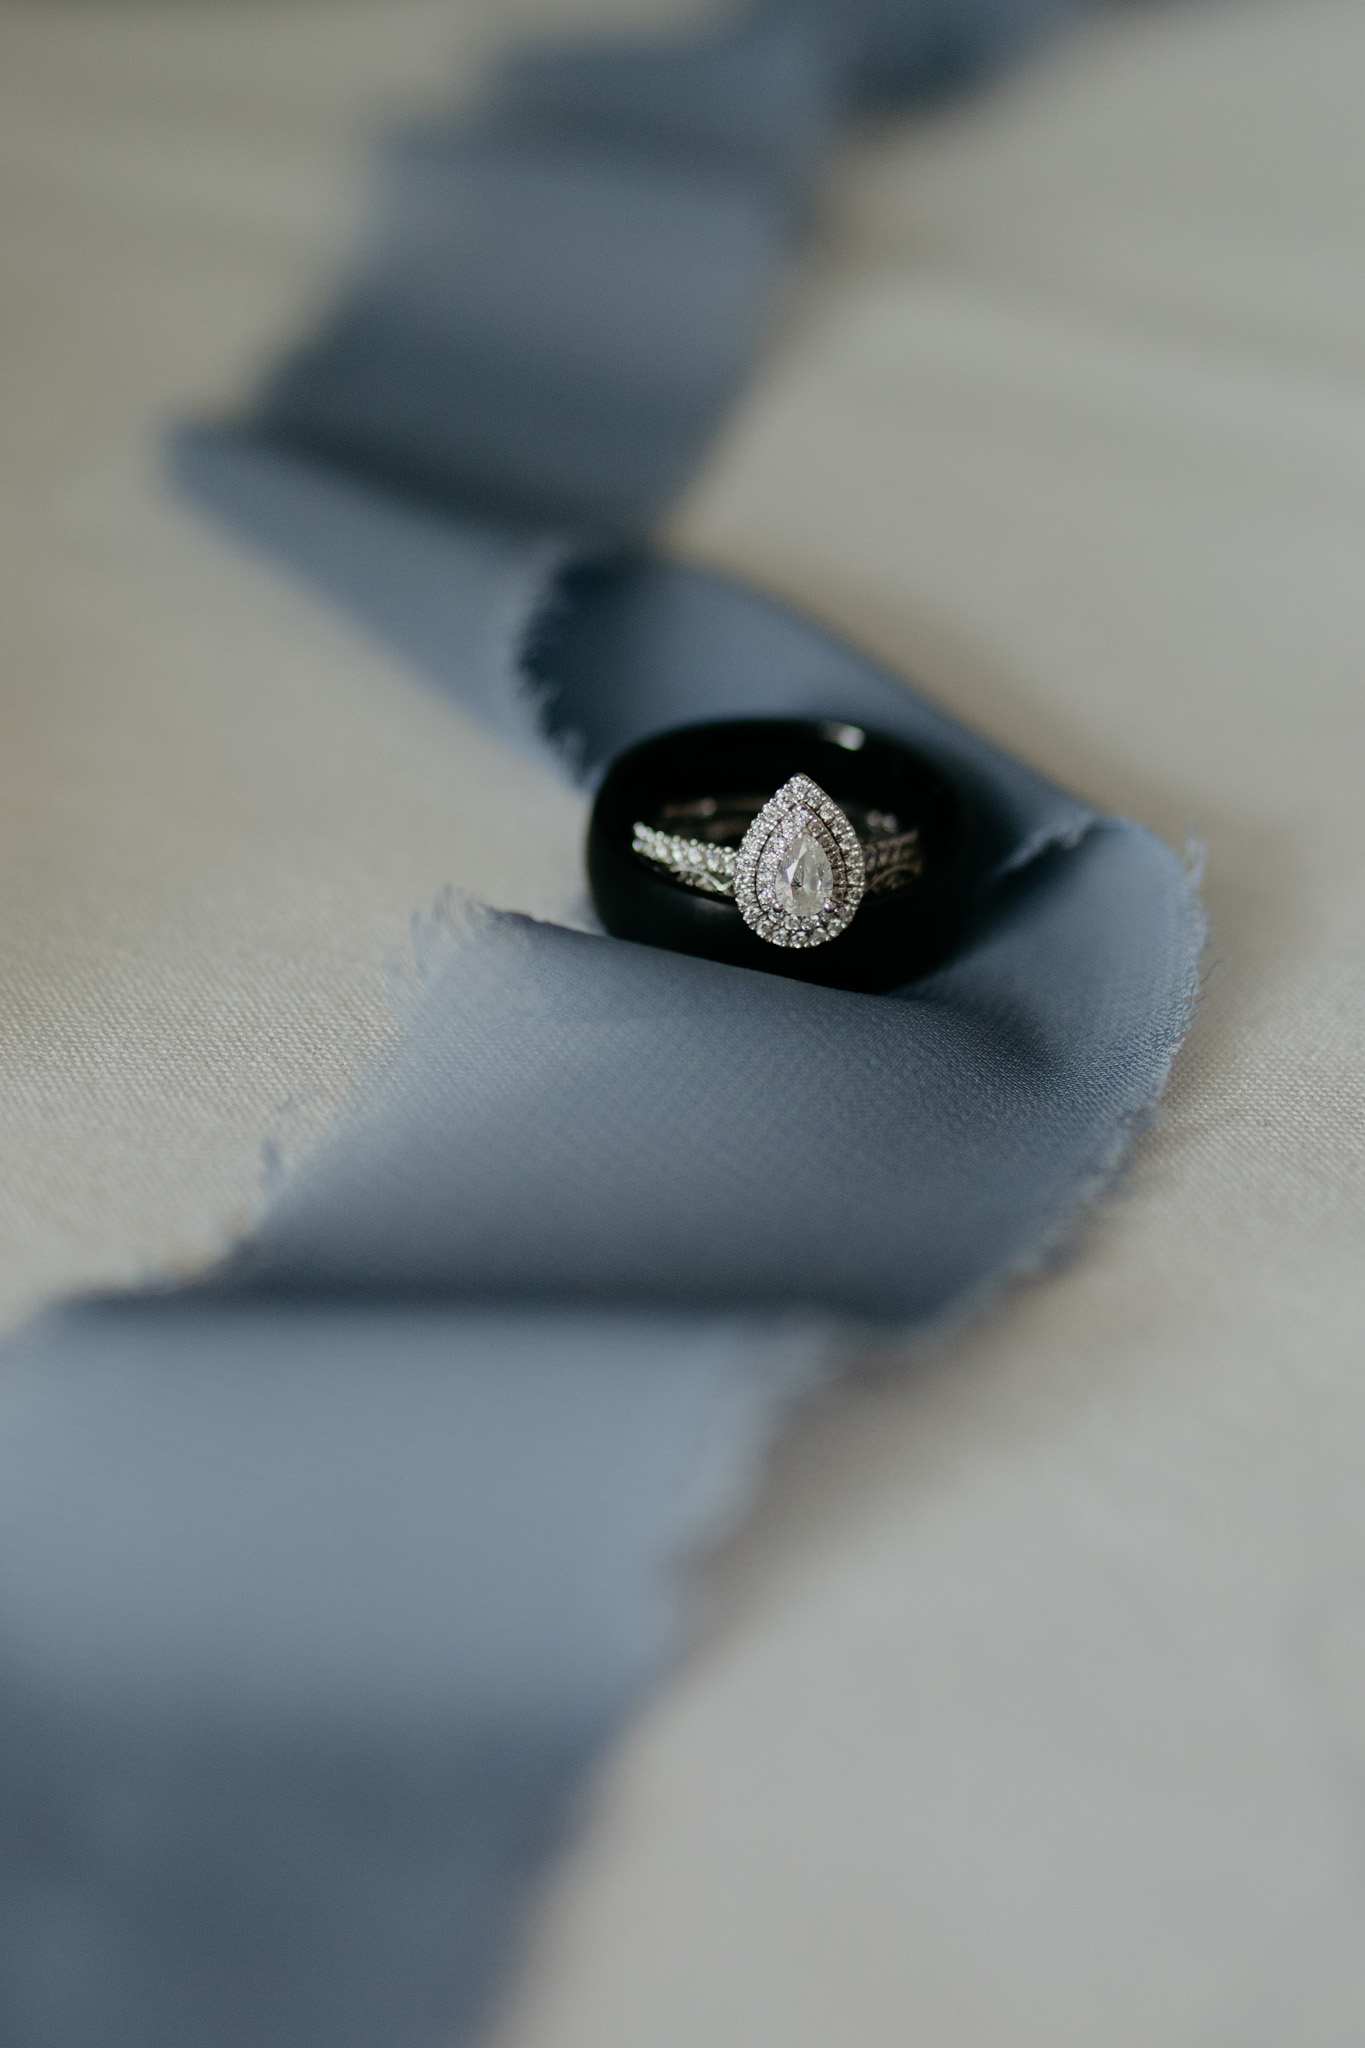 Ring details from this sweet Indiana summer wedding